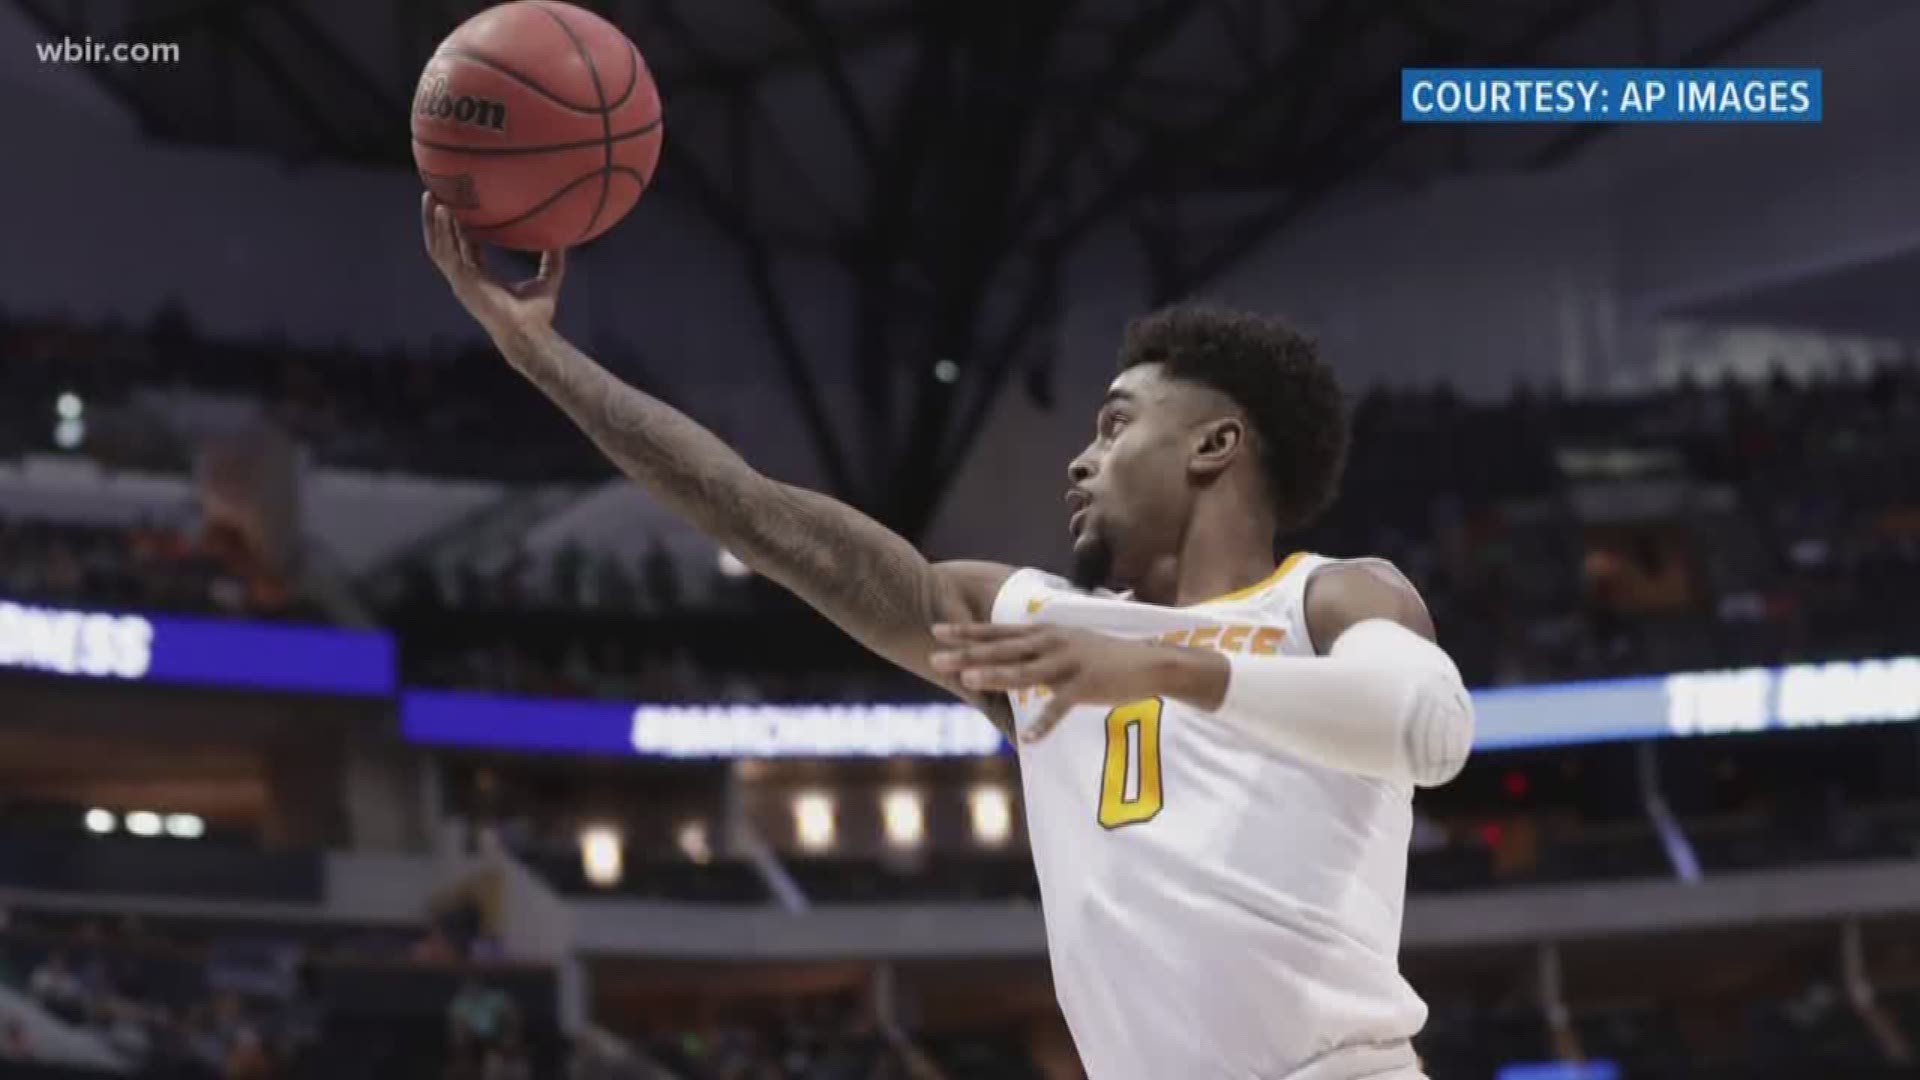 Tennessee narrowly loss to last year's Cinderella--- Loyola Chicago. Vol point guard Jordan Bone missed the final shot that could have won the game, and he's still devastated about it.